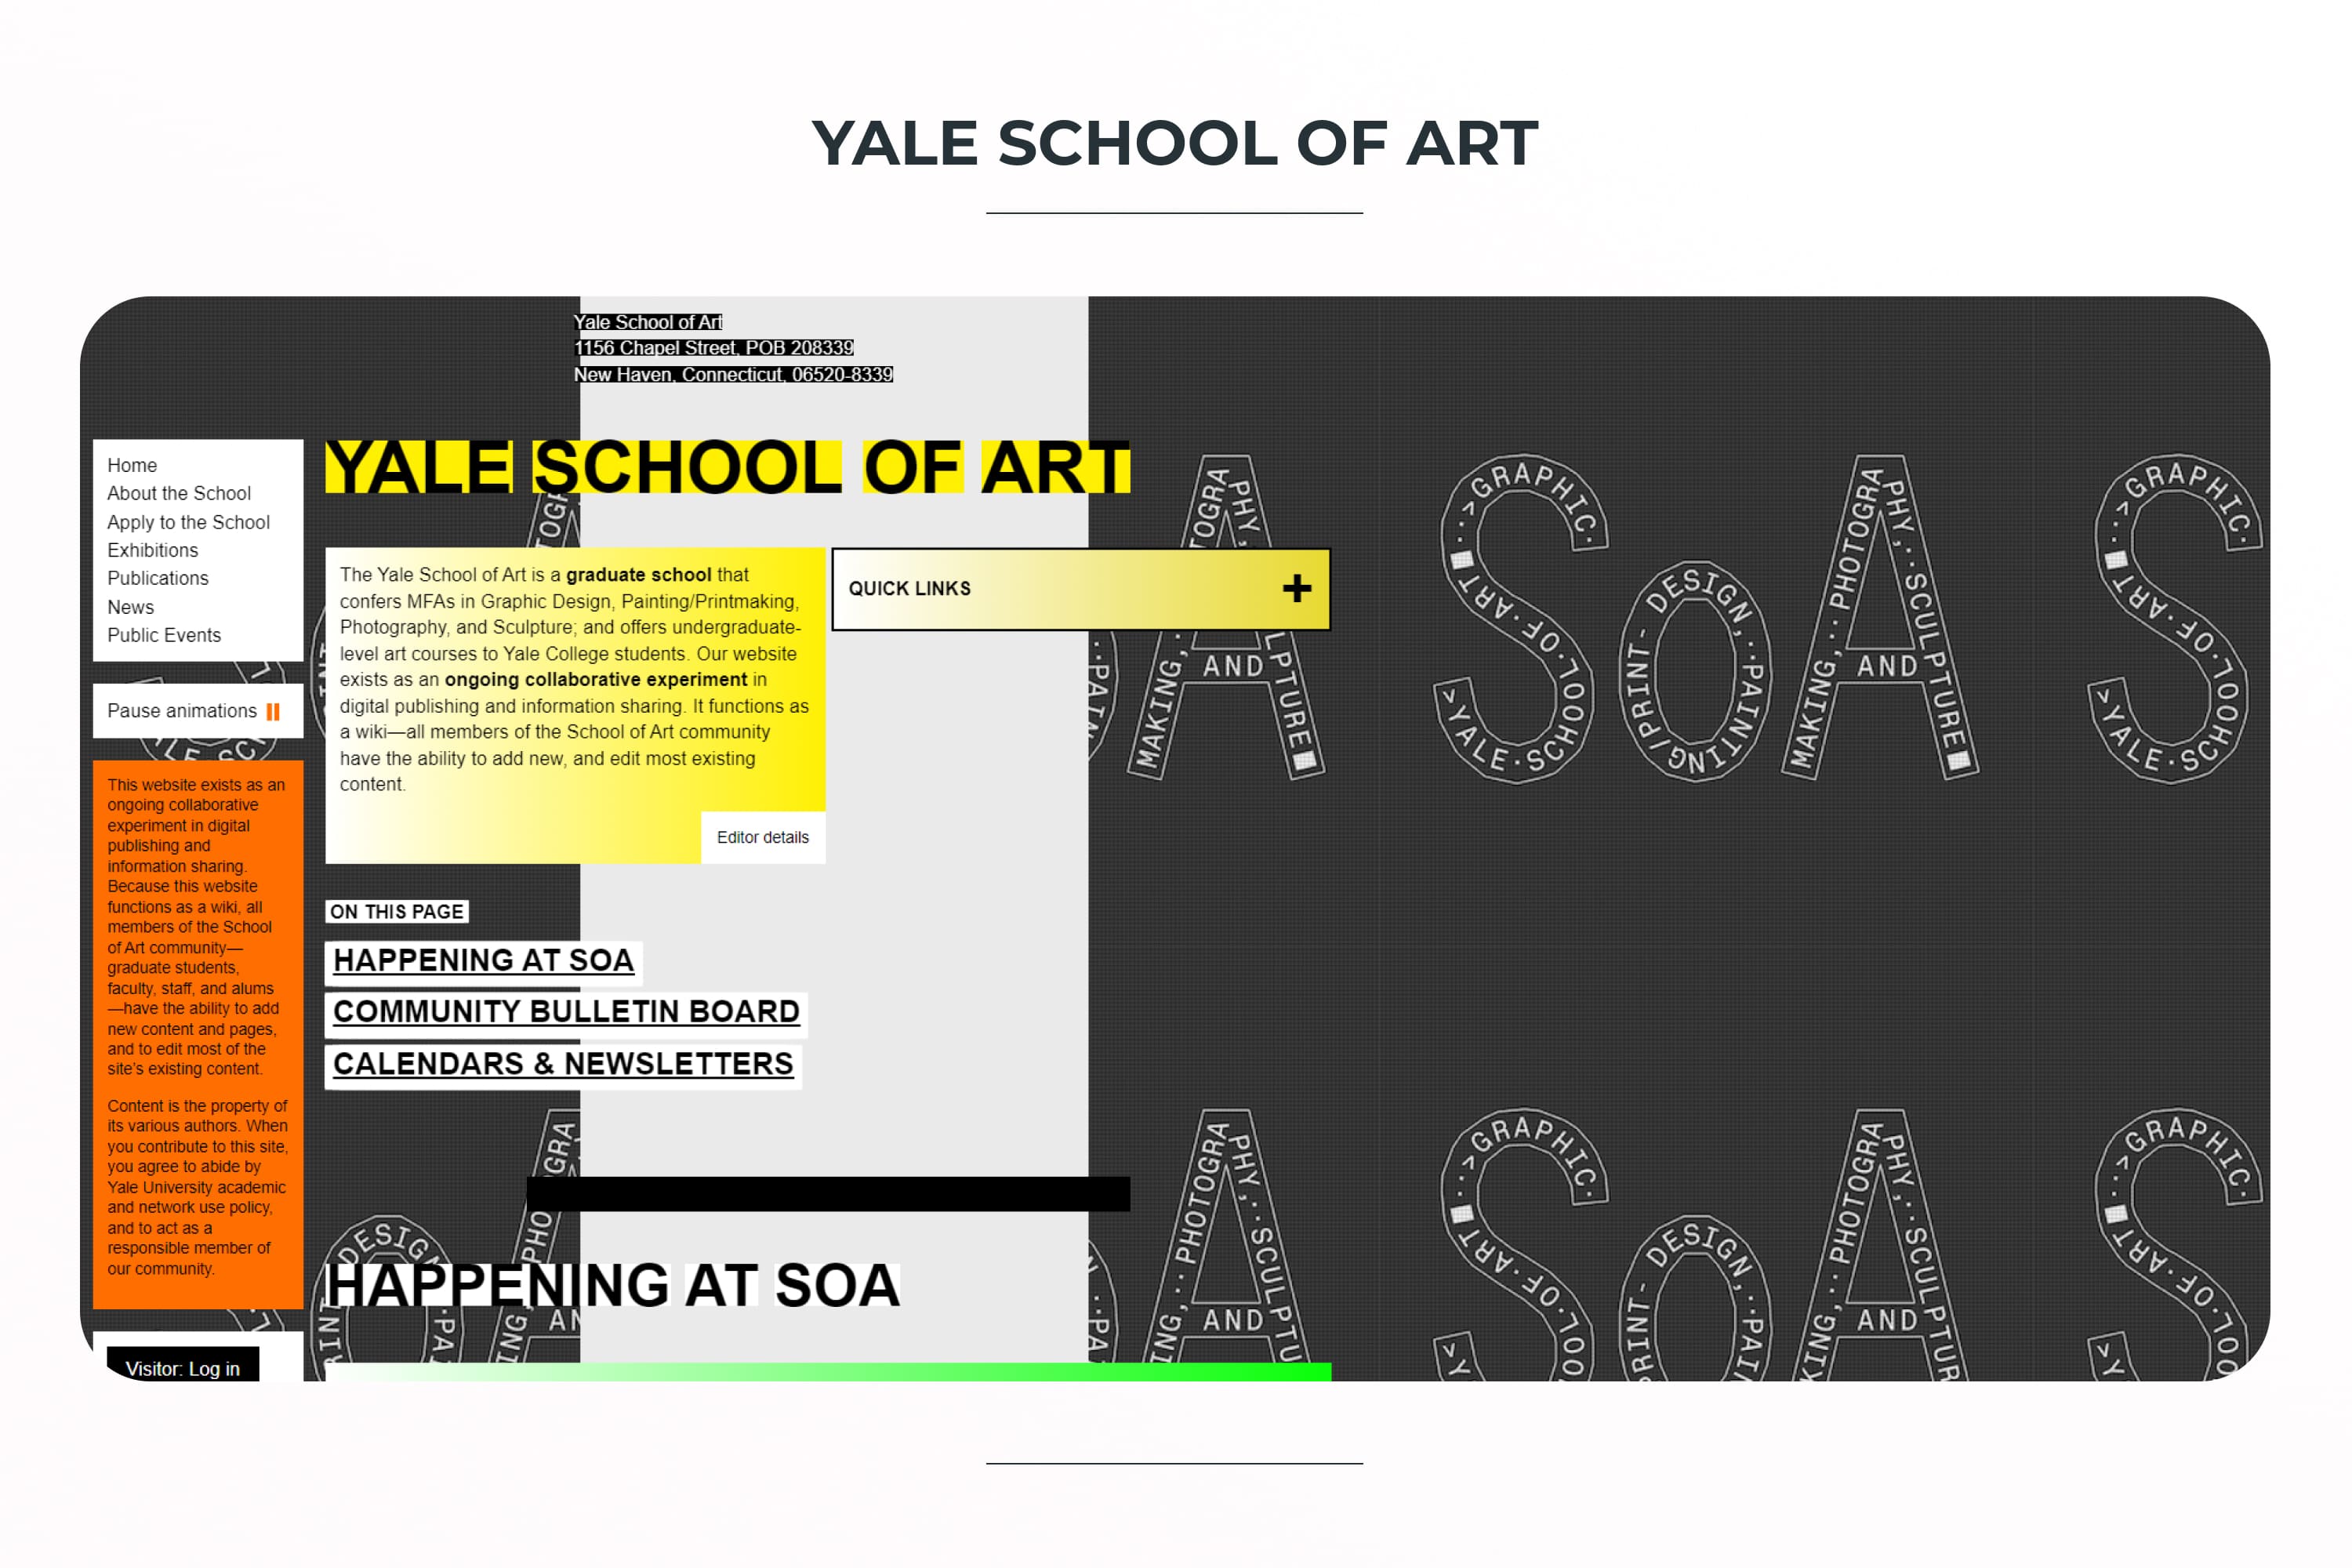 Main page of the Yale School of Art website.